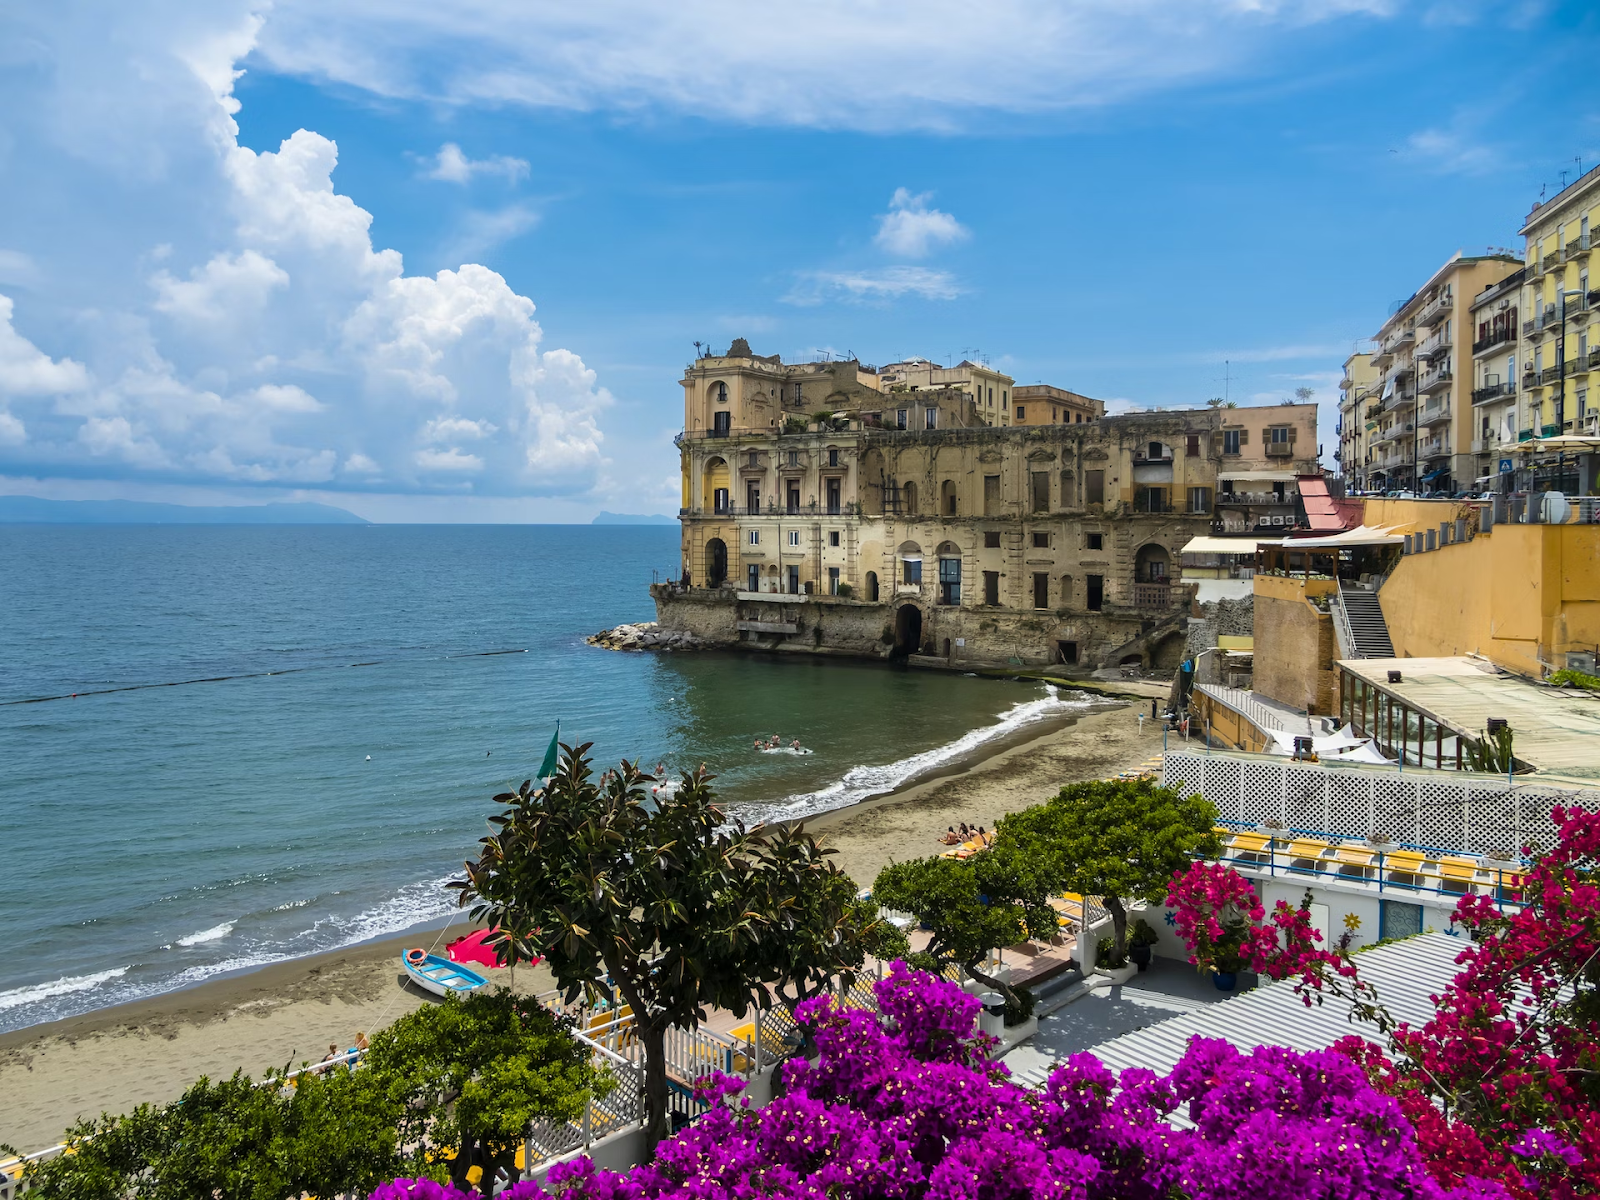 Historical site along Amalfi coastline is shown in the picture during comparing with Naples